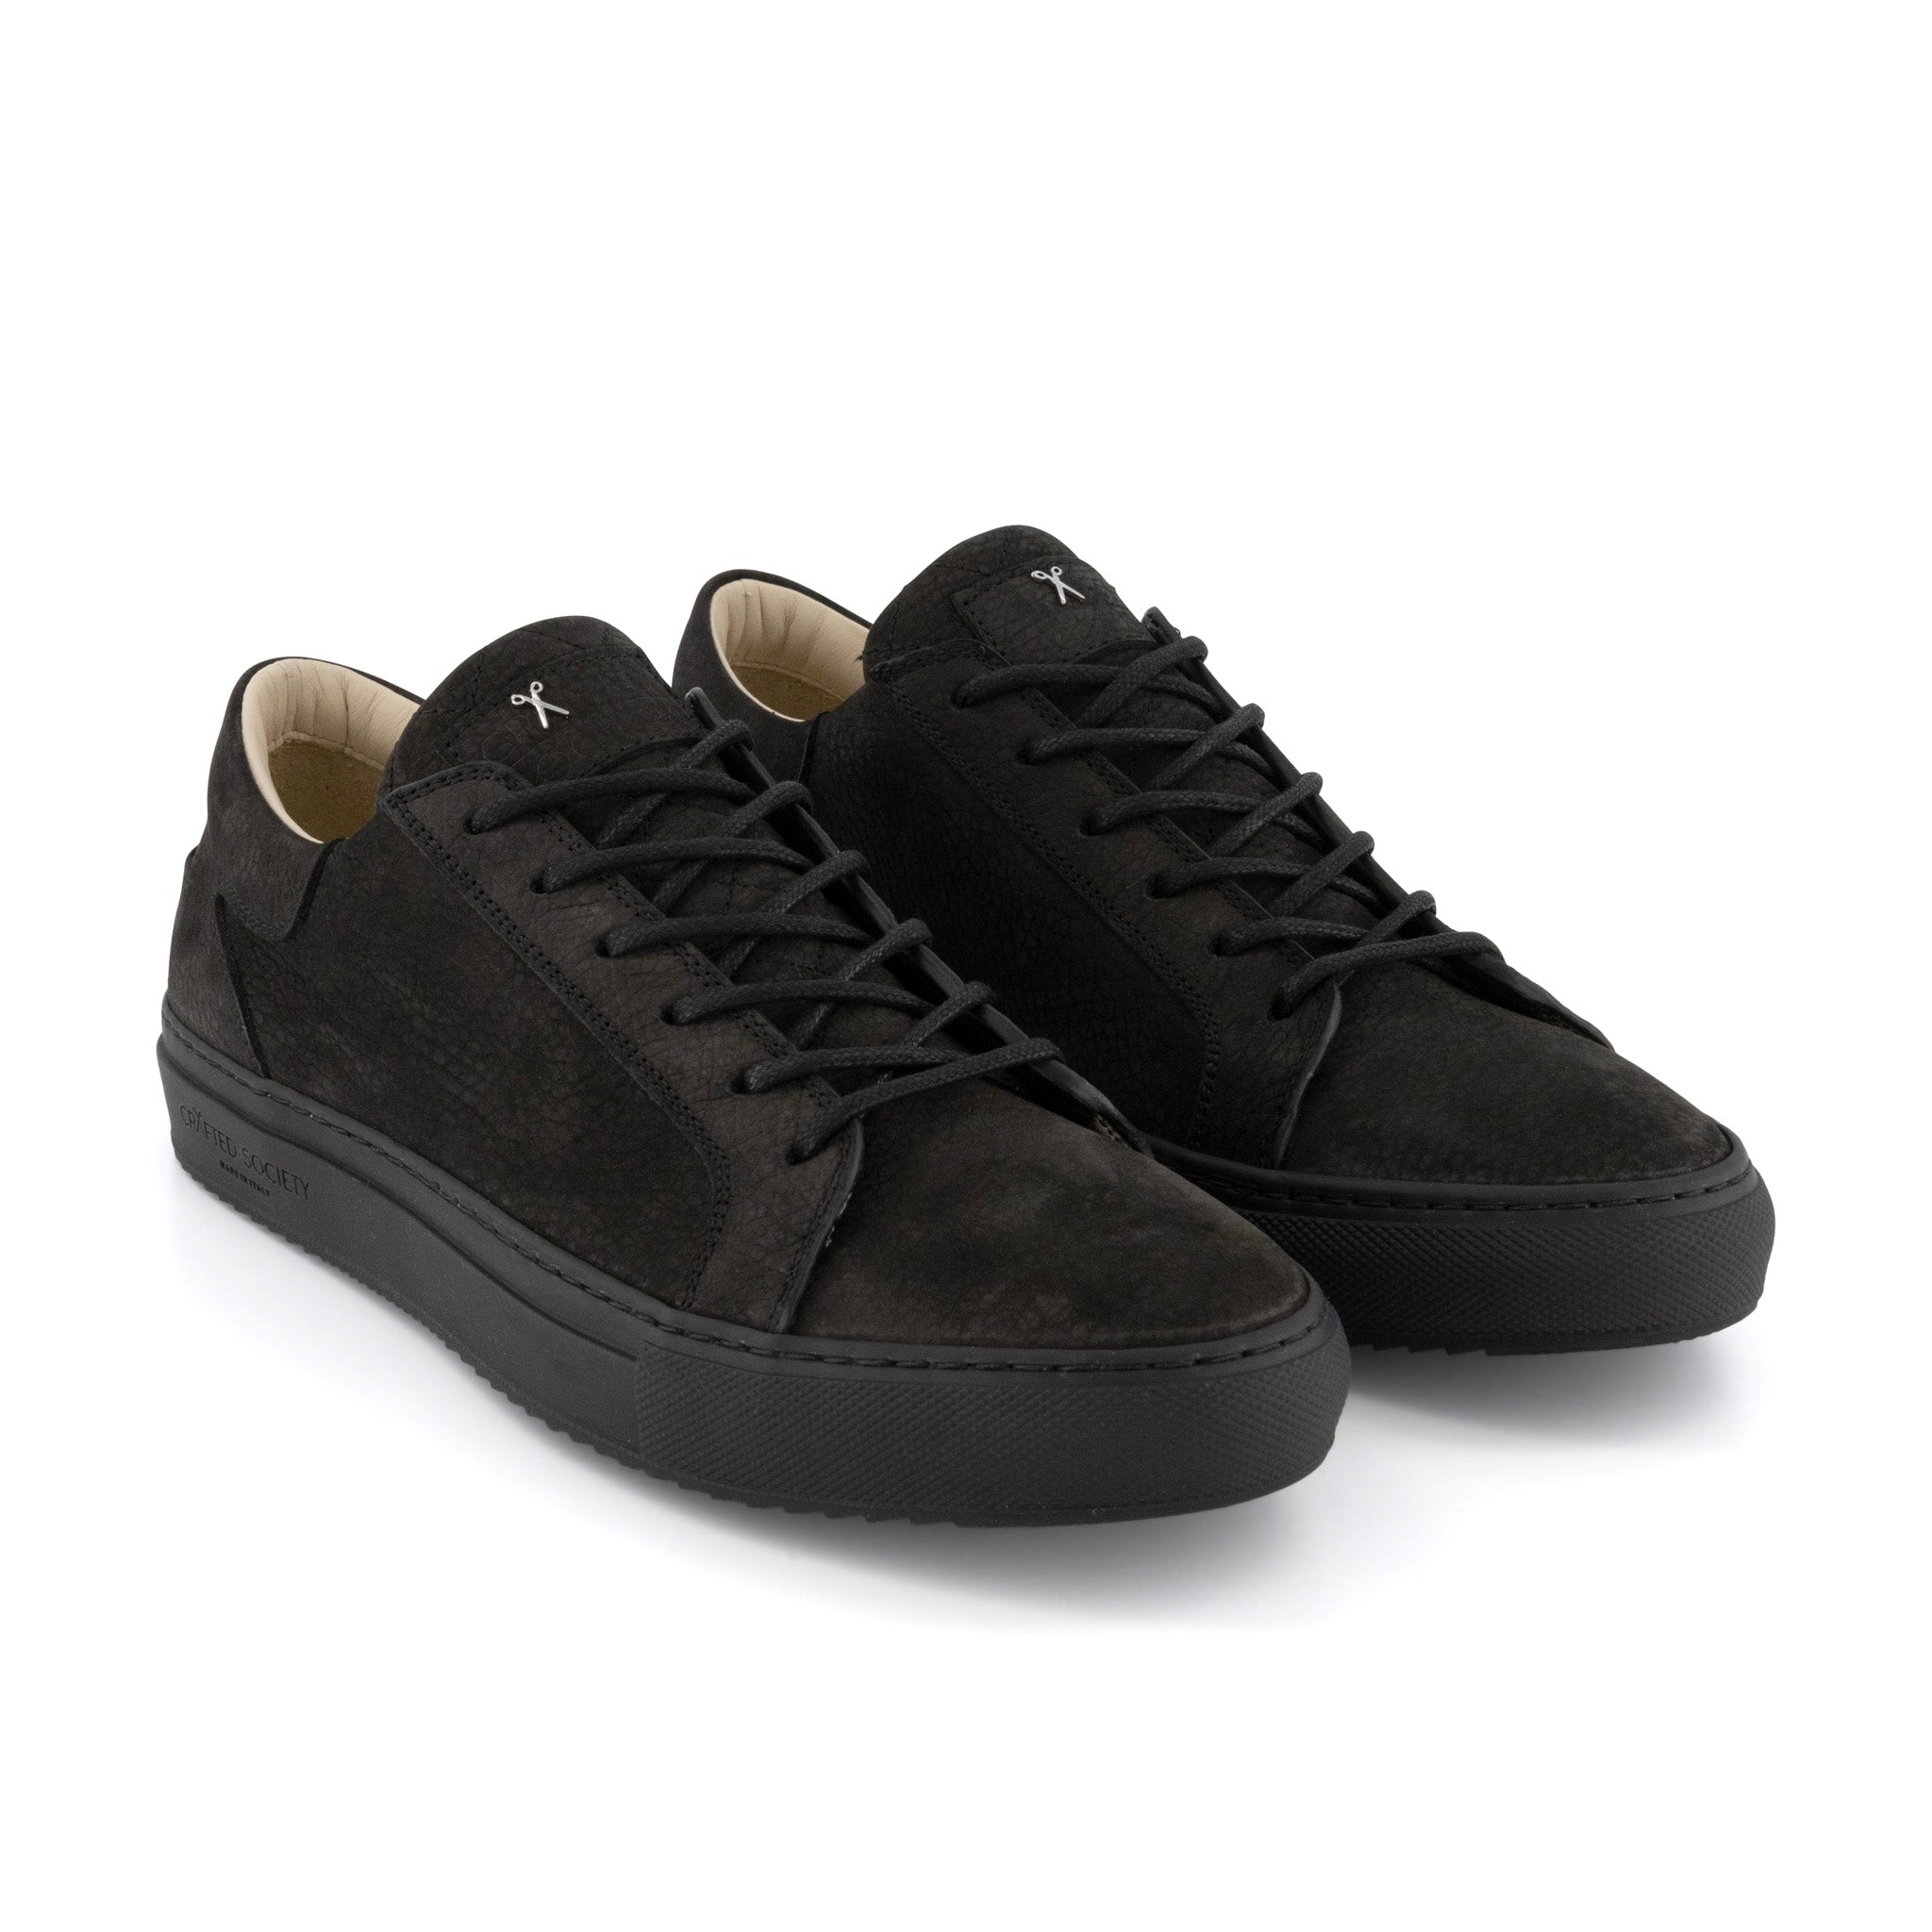 Mario Low Refined Sneaker | Black Nubuck | Black Outsole | Made in Italy | Sizes 39, 40 & 41